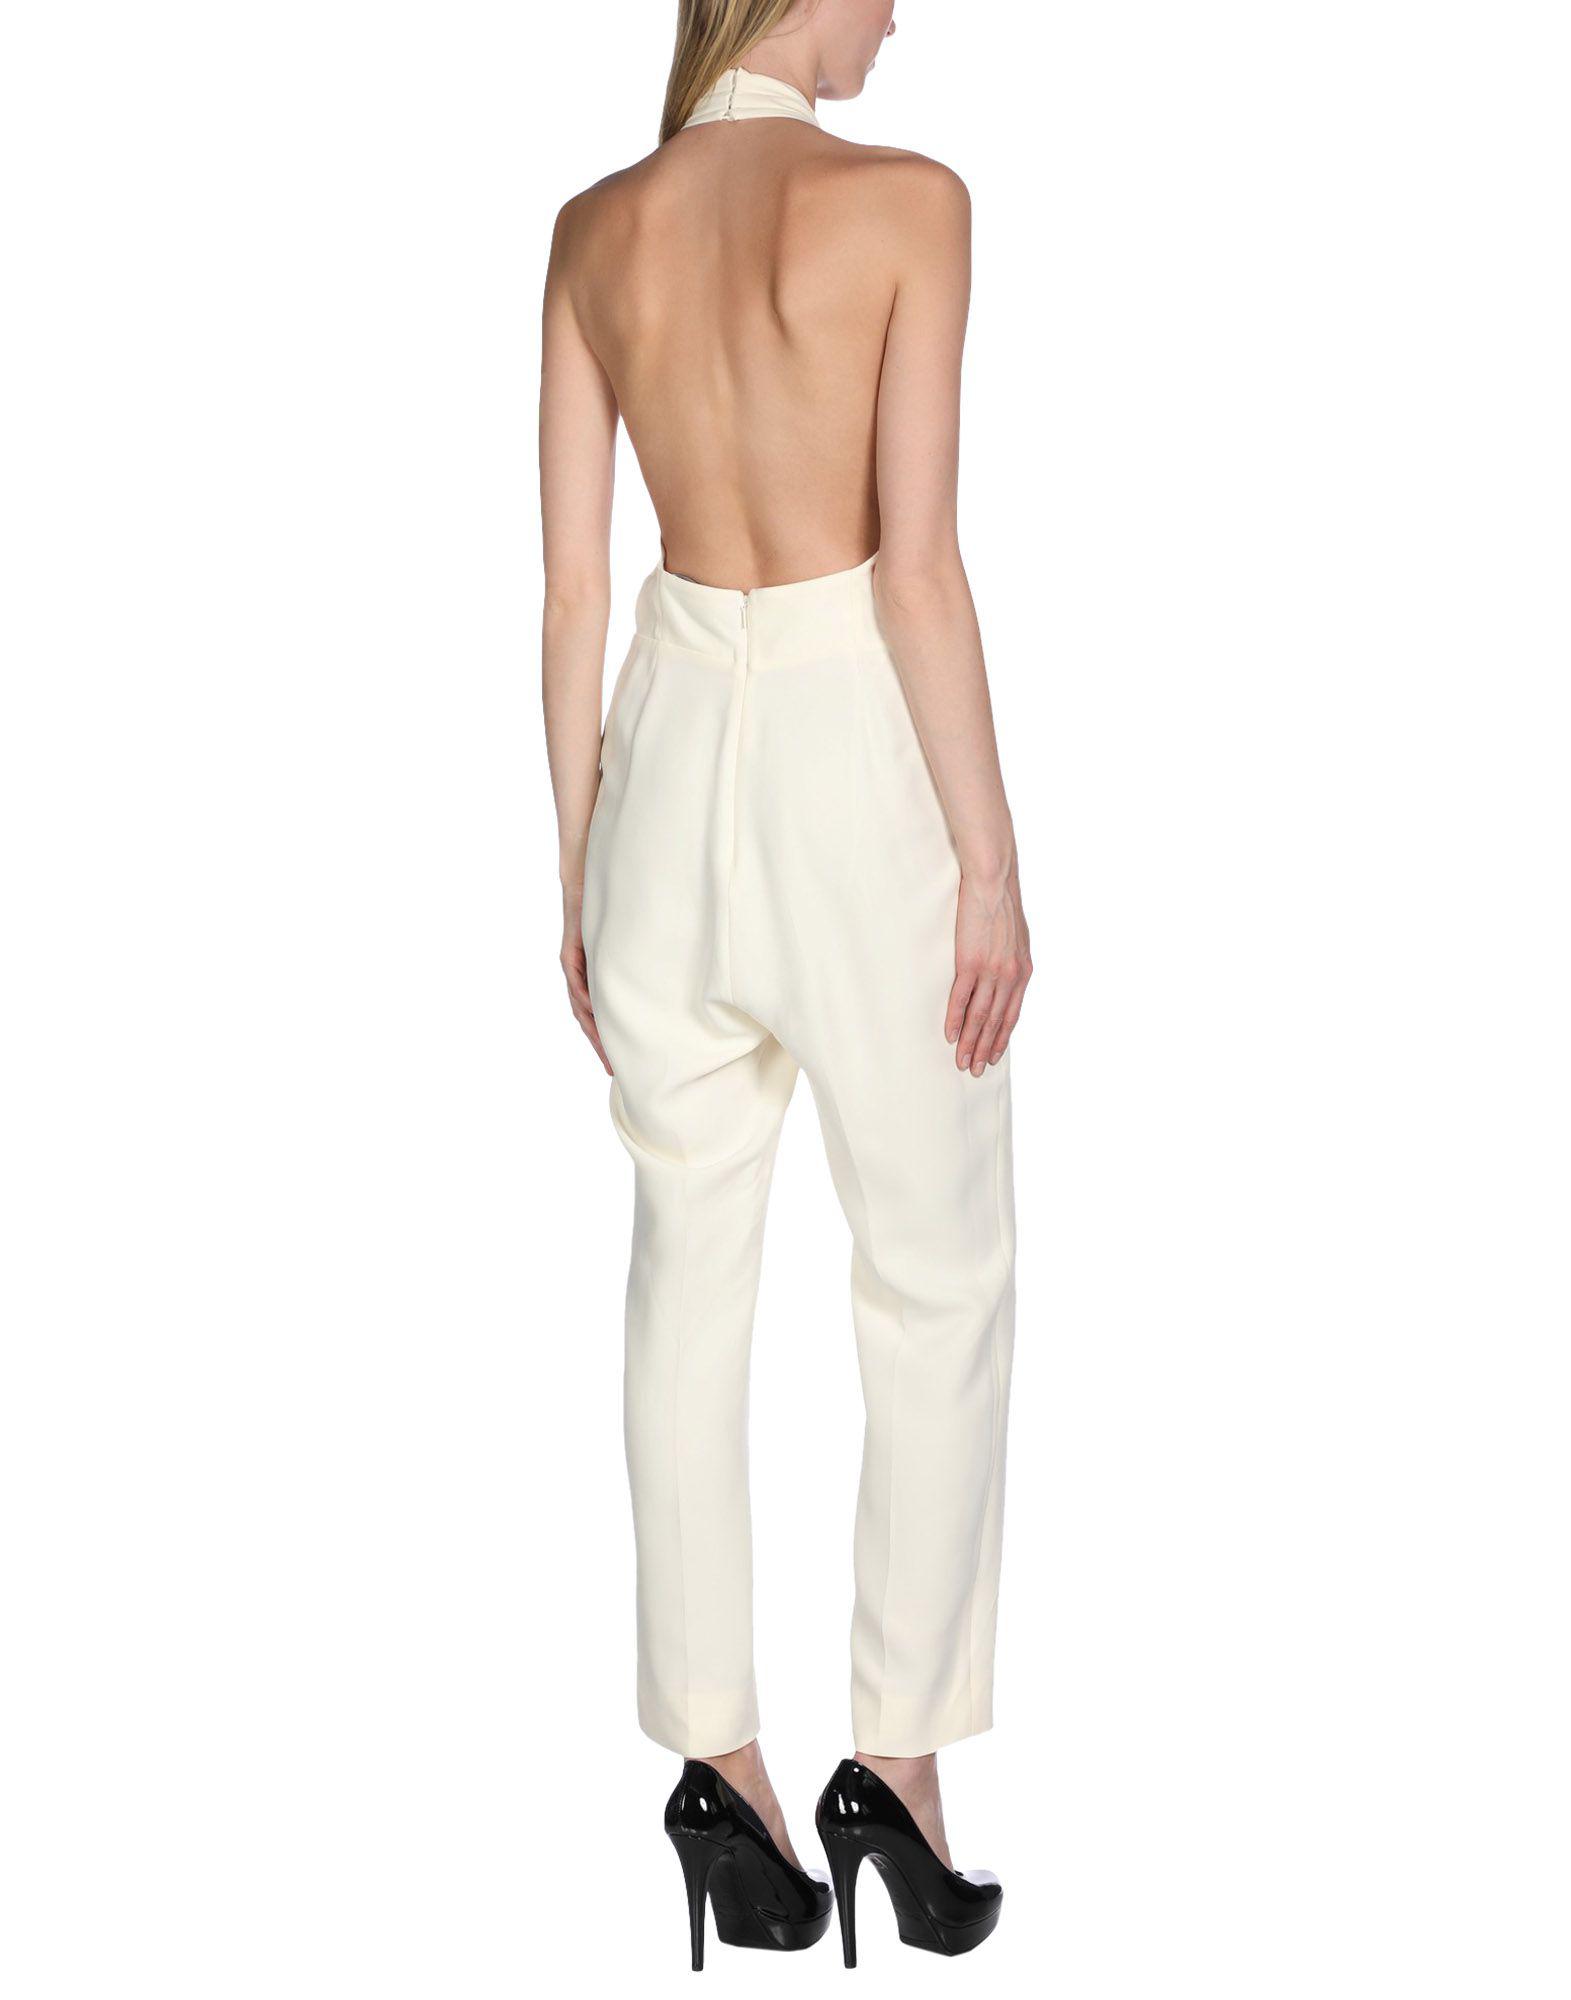 Gucci Silk Jumpsuit in Ivory (White) - Lyst